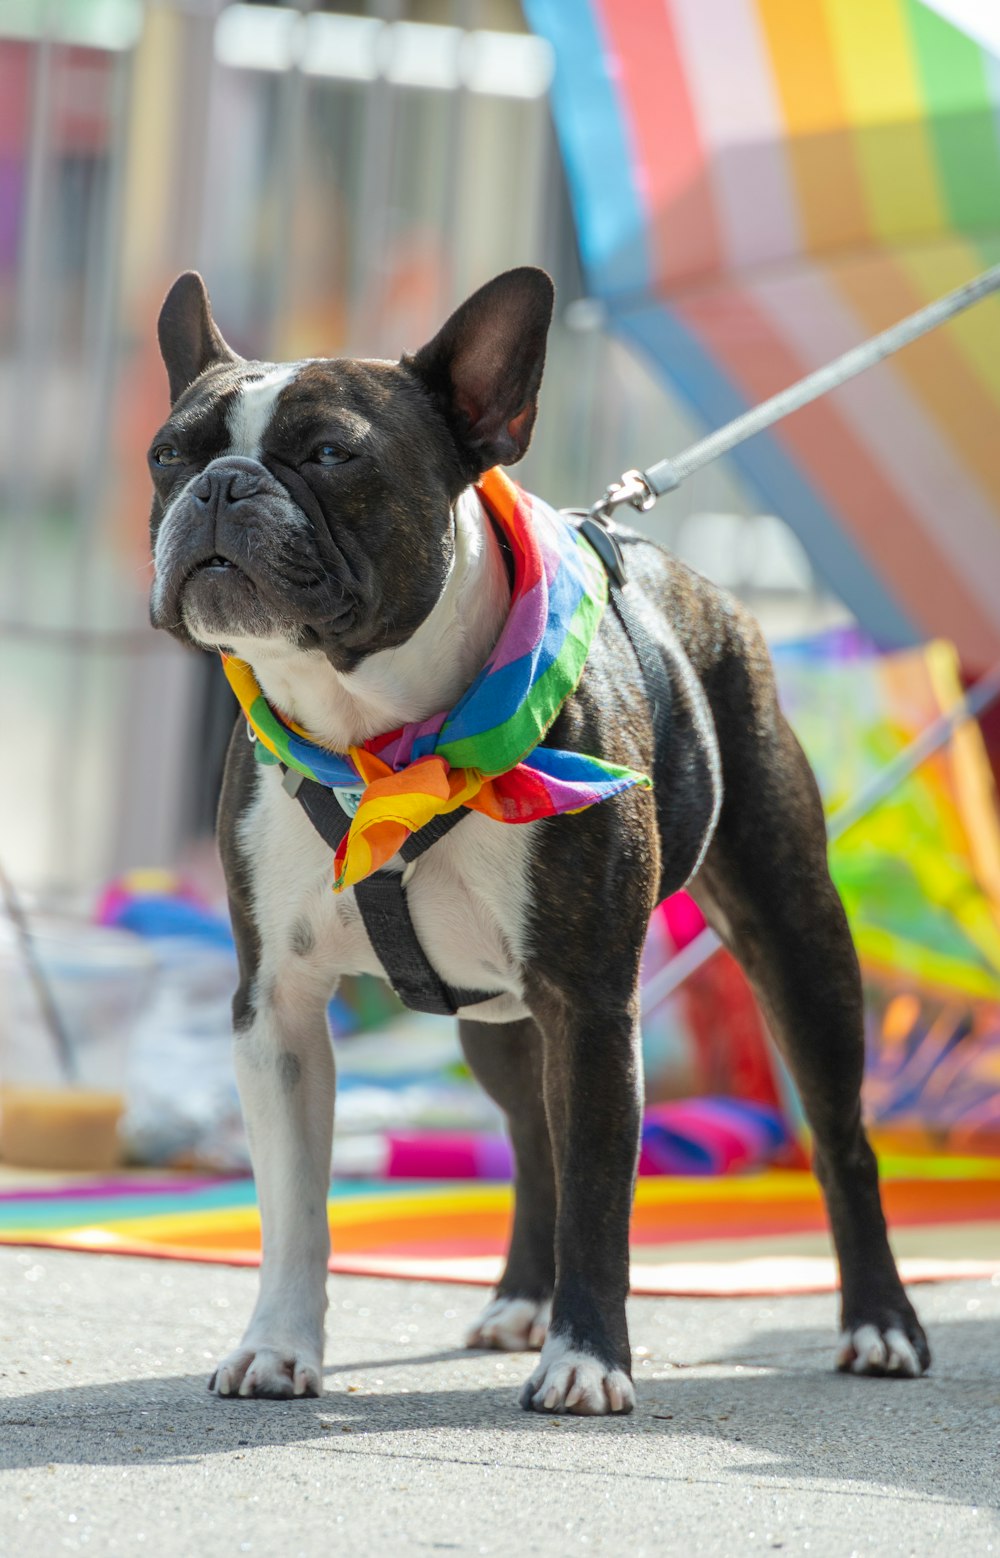 a small dog wearing a colorful collar and leash